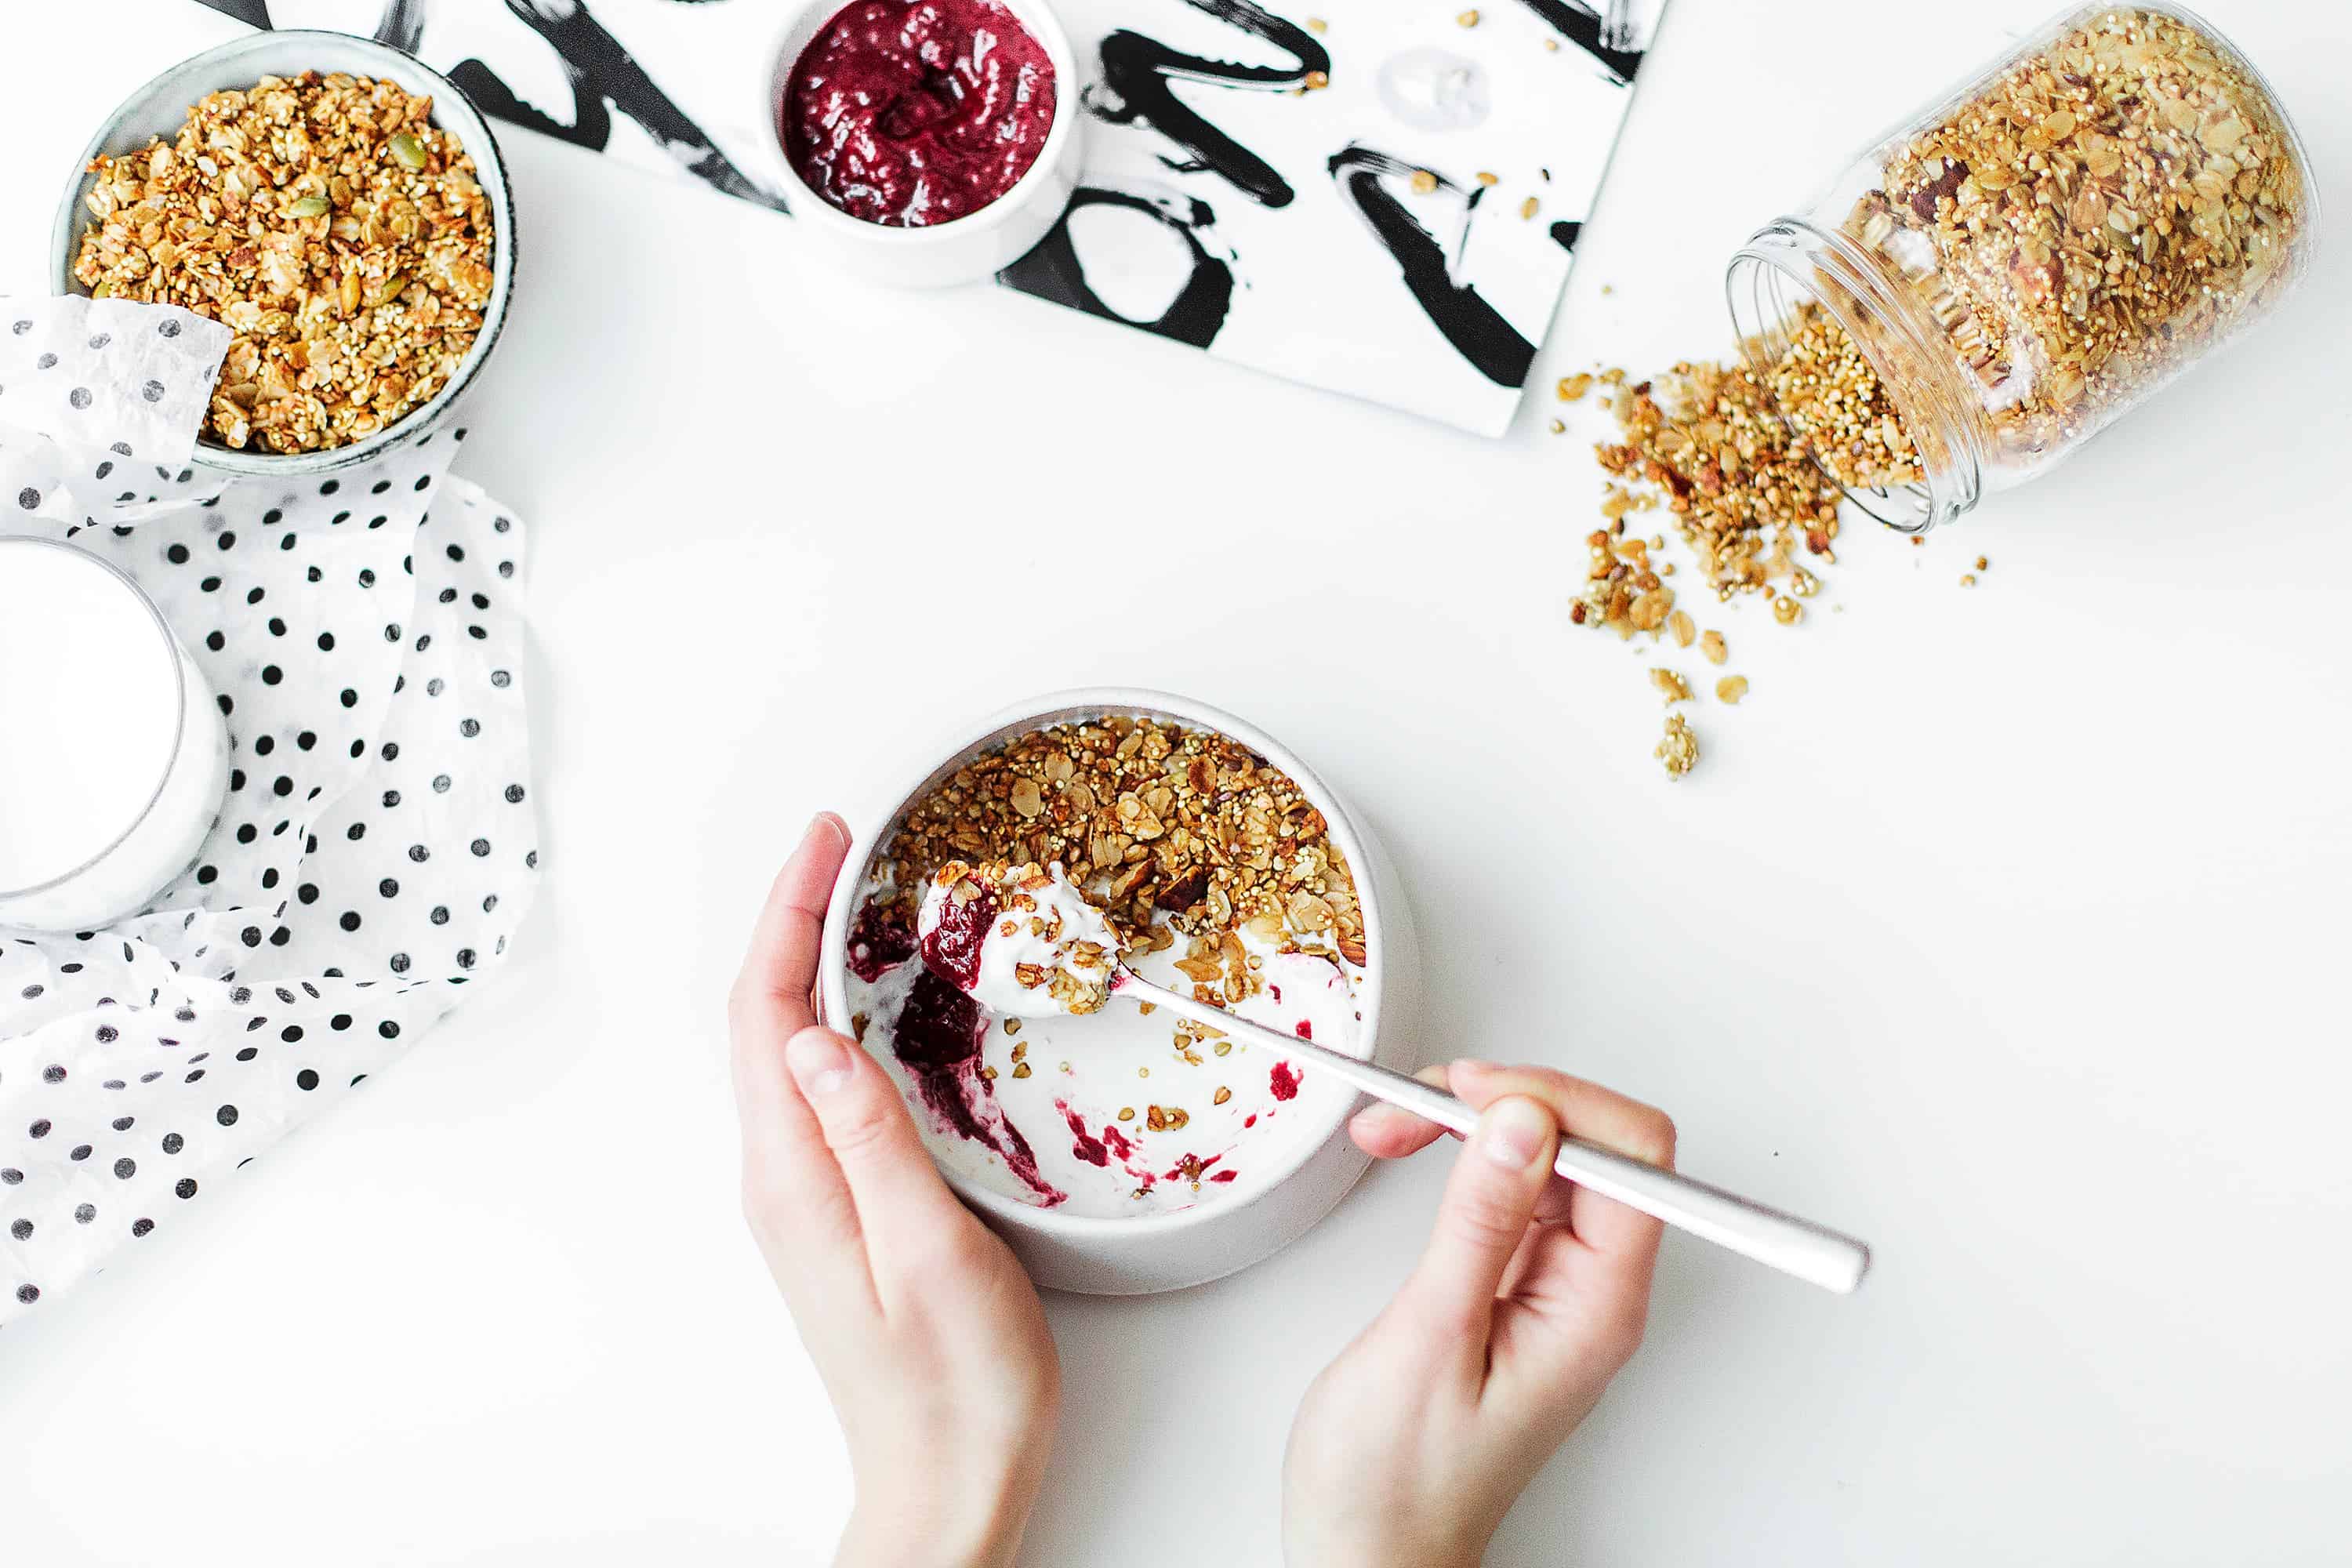 Whole grains, dairy, seeds and nuts represent healthy options from a DASH diet. via static pexels